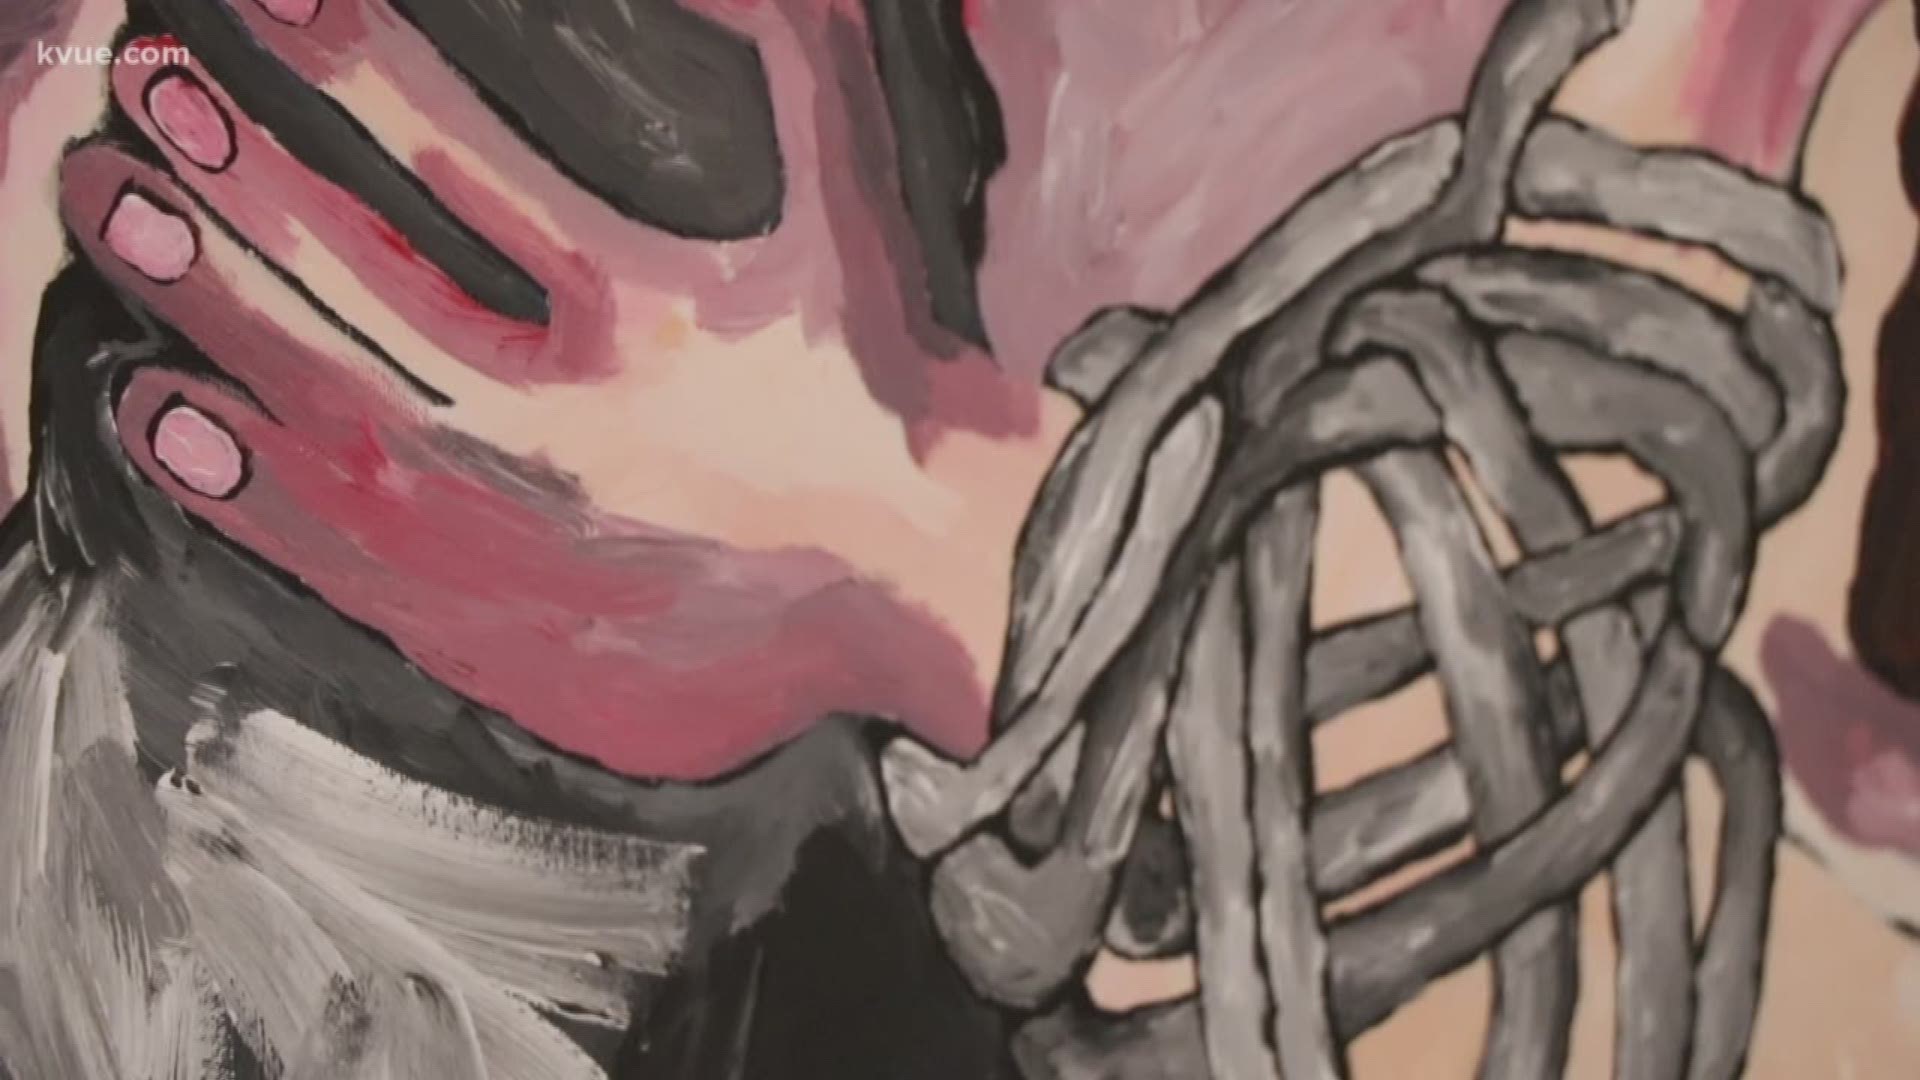 Local artists are bringing awareness to human trafficking by showcasing 2-D and 3-D artwork.